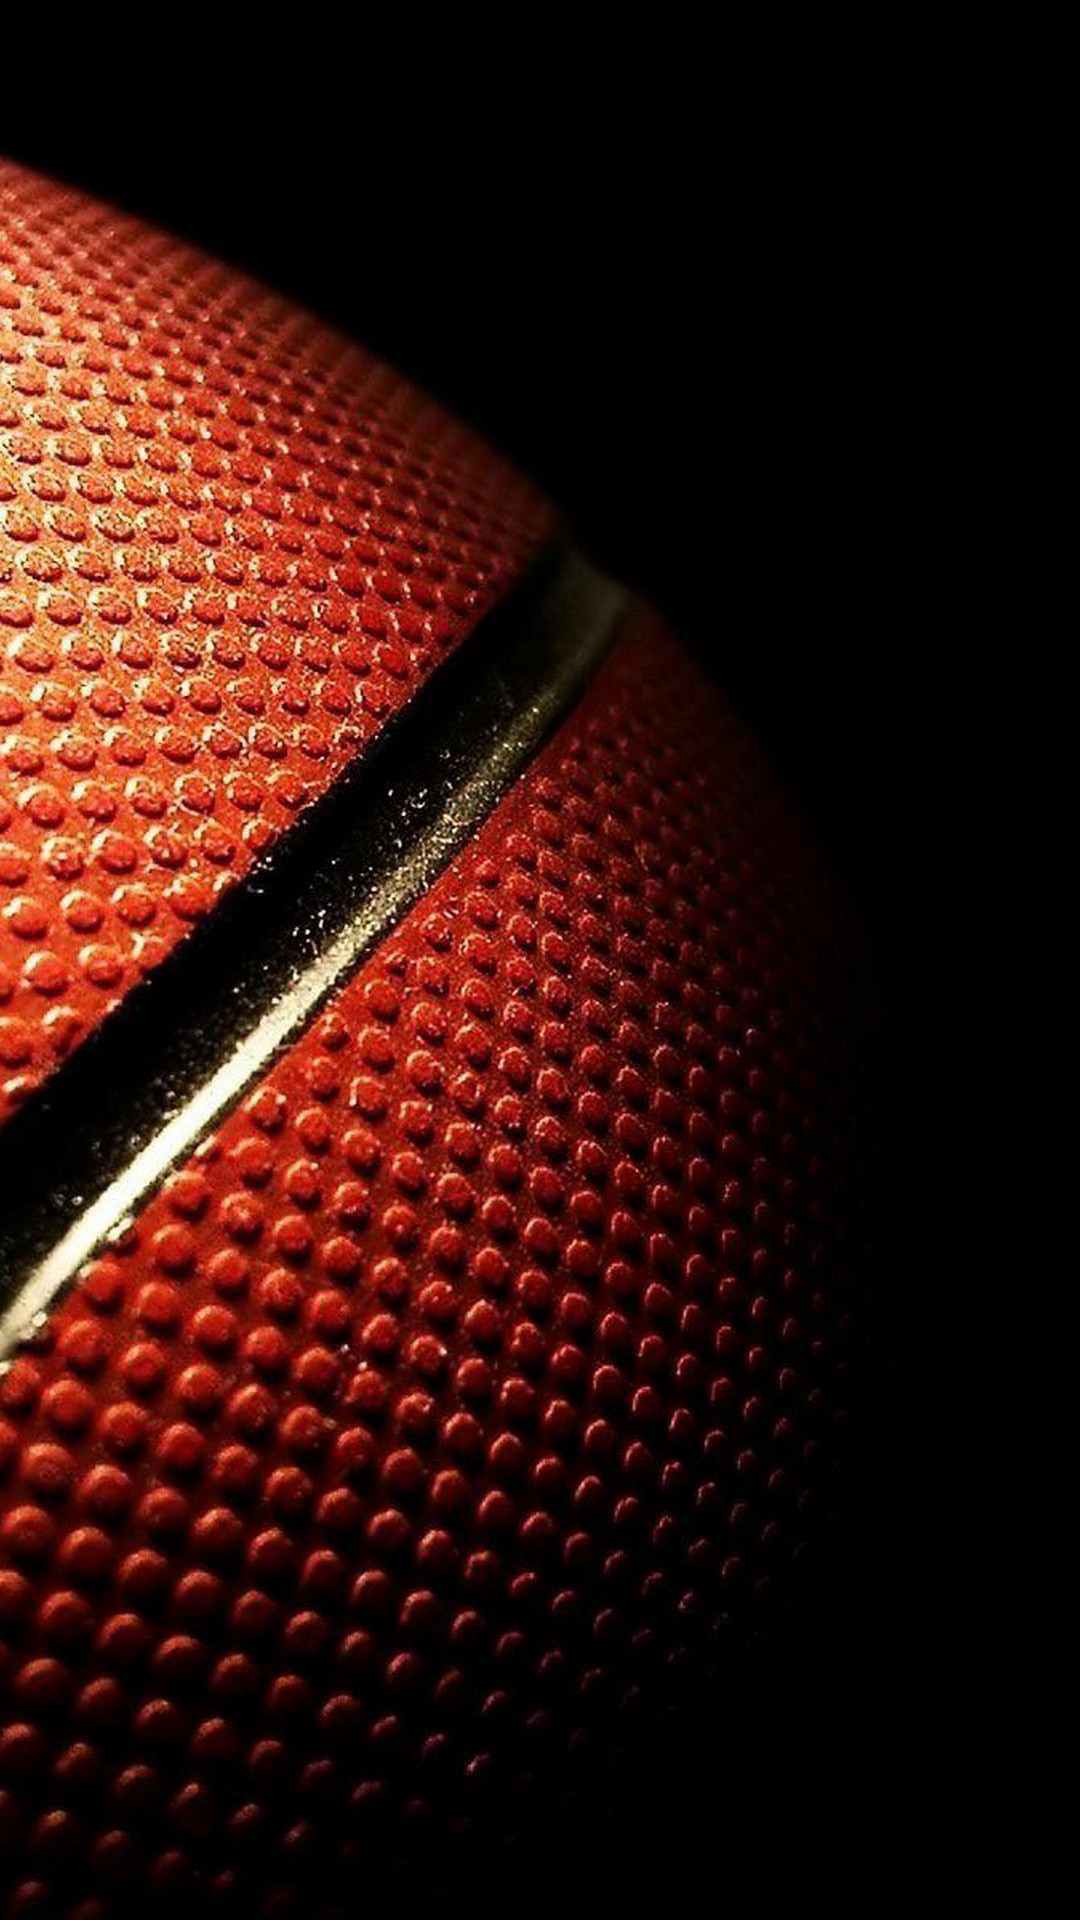 Hd Wallpaper Basketball For Android - 1080x1920 Wallpaper 